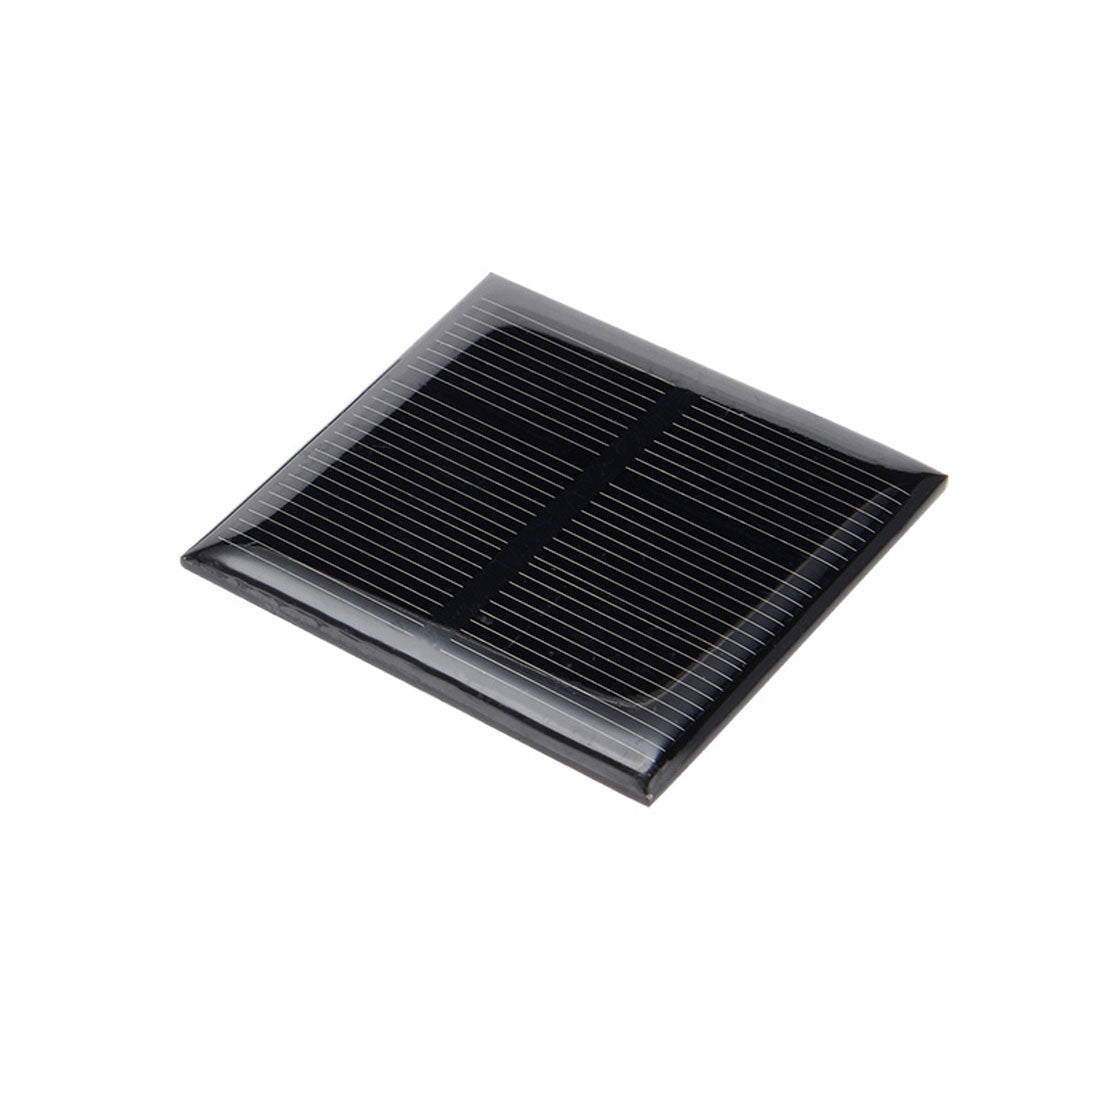 uxcell Uxcell 5Pcs 1.5V 200mA Poly Mini Solar Cell Panel Module DIY for Light Toys Charger 52mm x 52mm